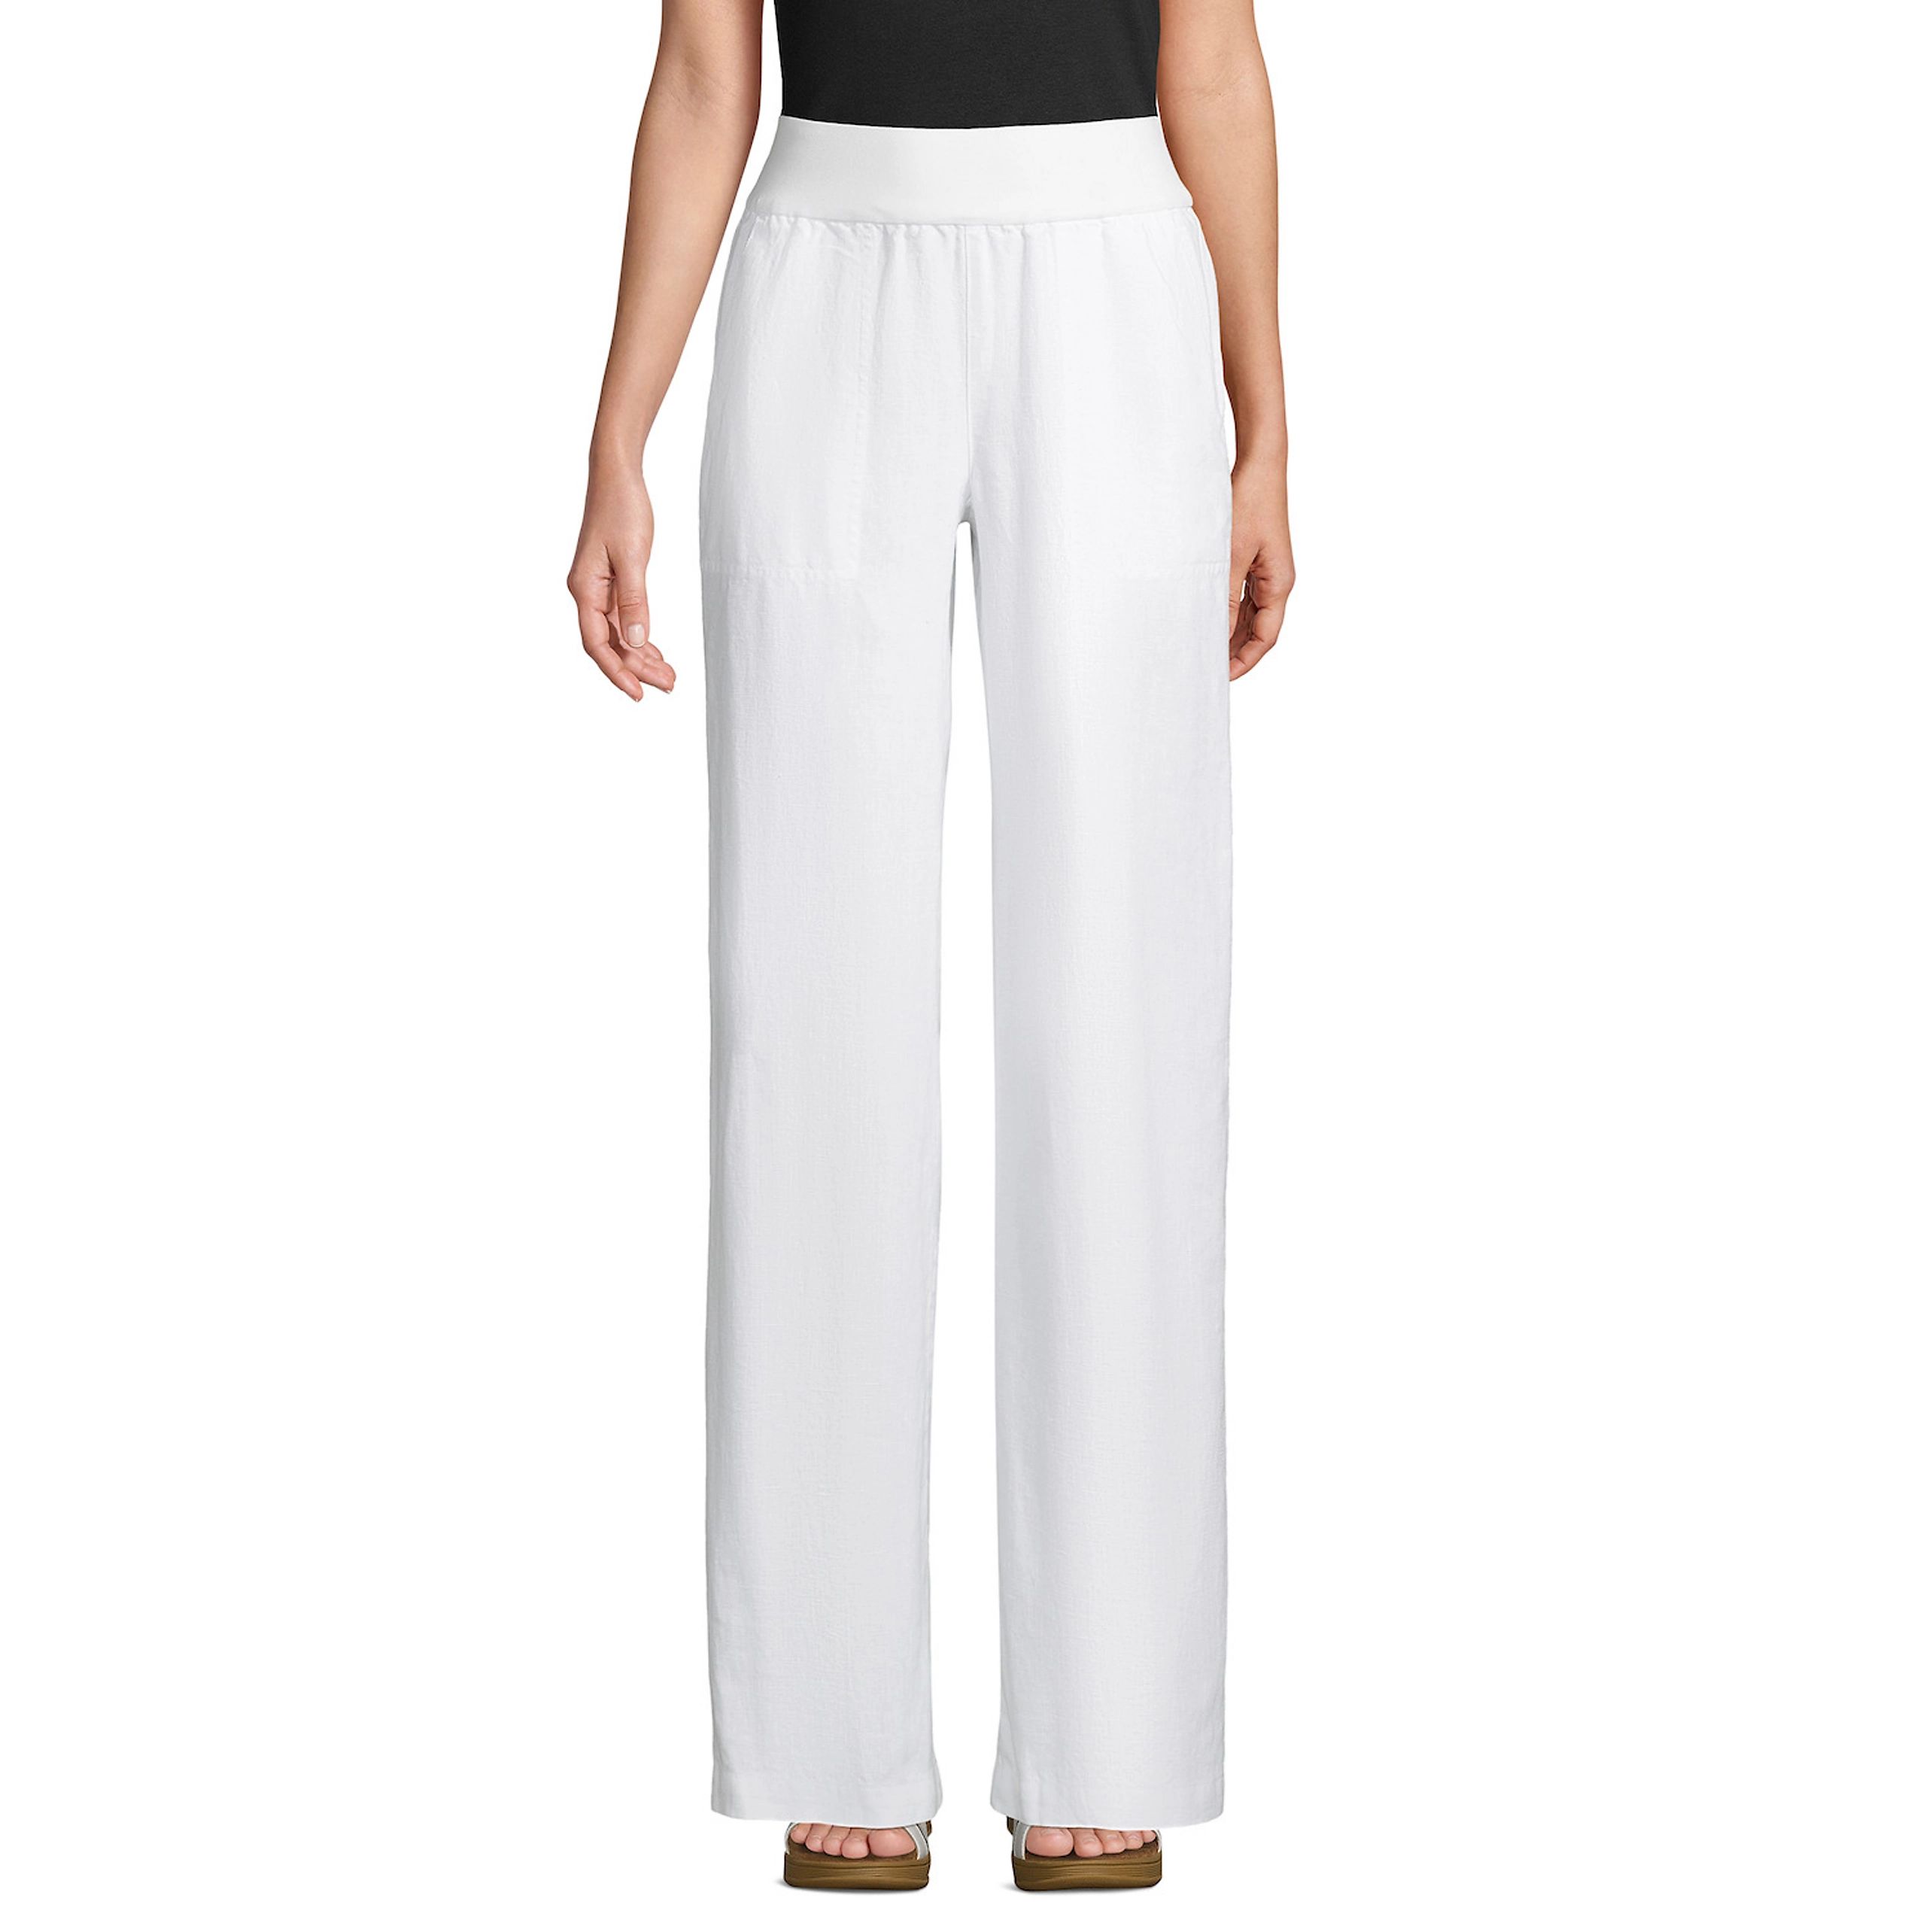 Petite Lands' End Linen Pull-On Wide-Leg High-Waisted Pants | Kohl's